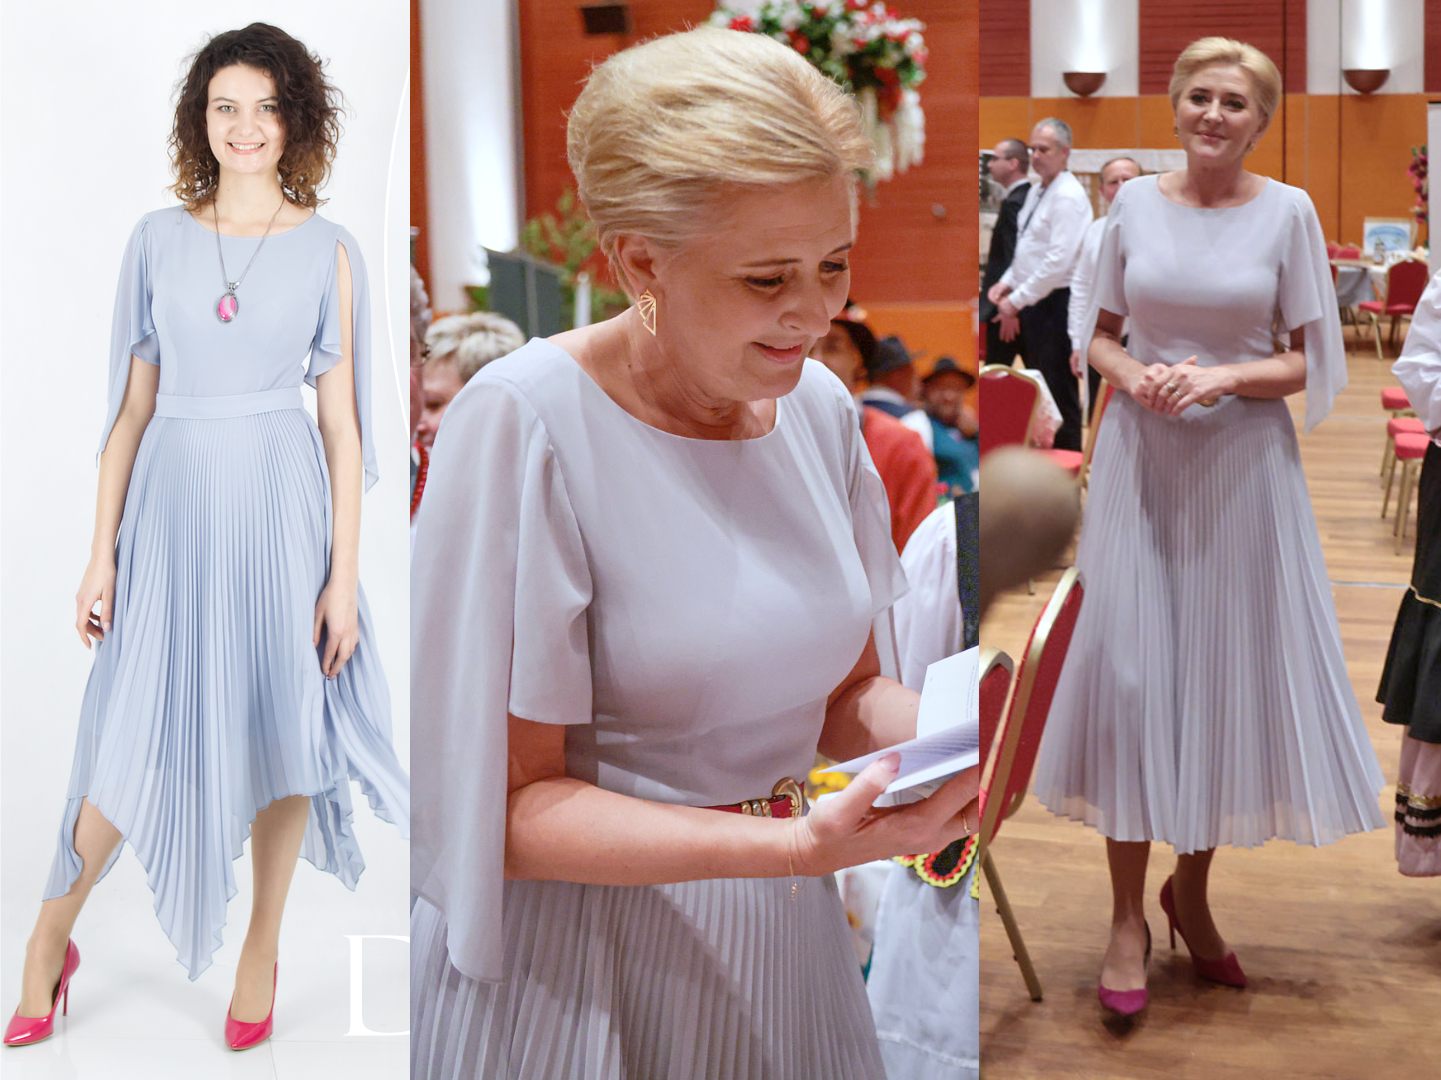 The most fashionable dresses for summer – First Lady of the Republic of Poland Agata Kornhauser-Duda’s choice